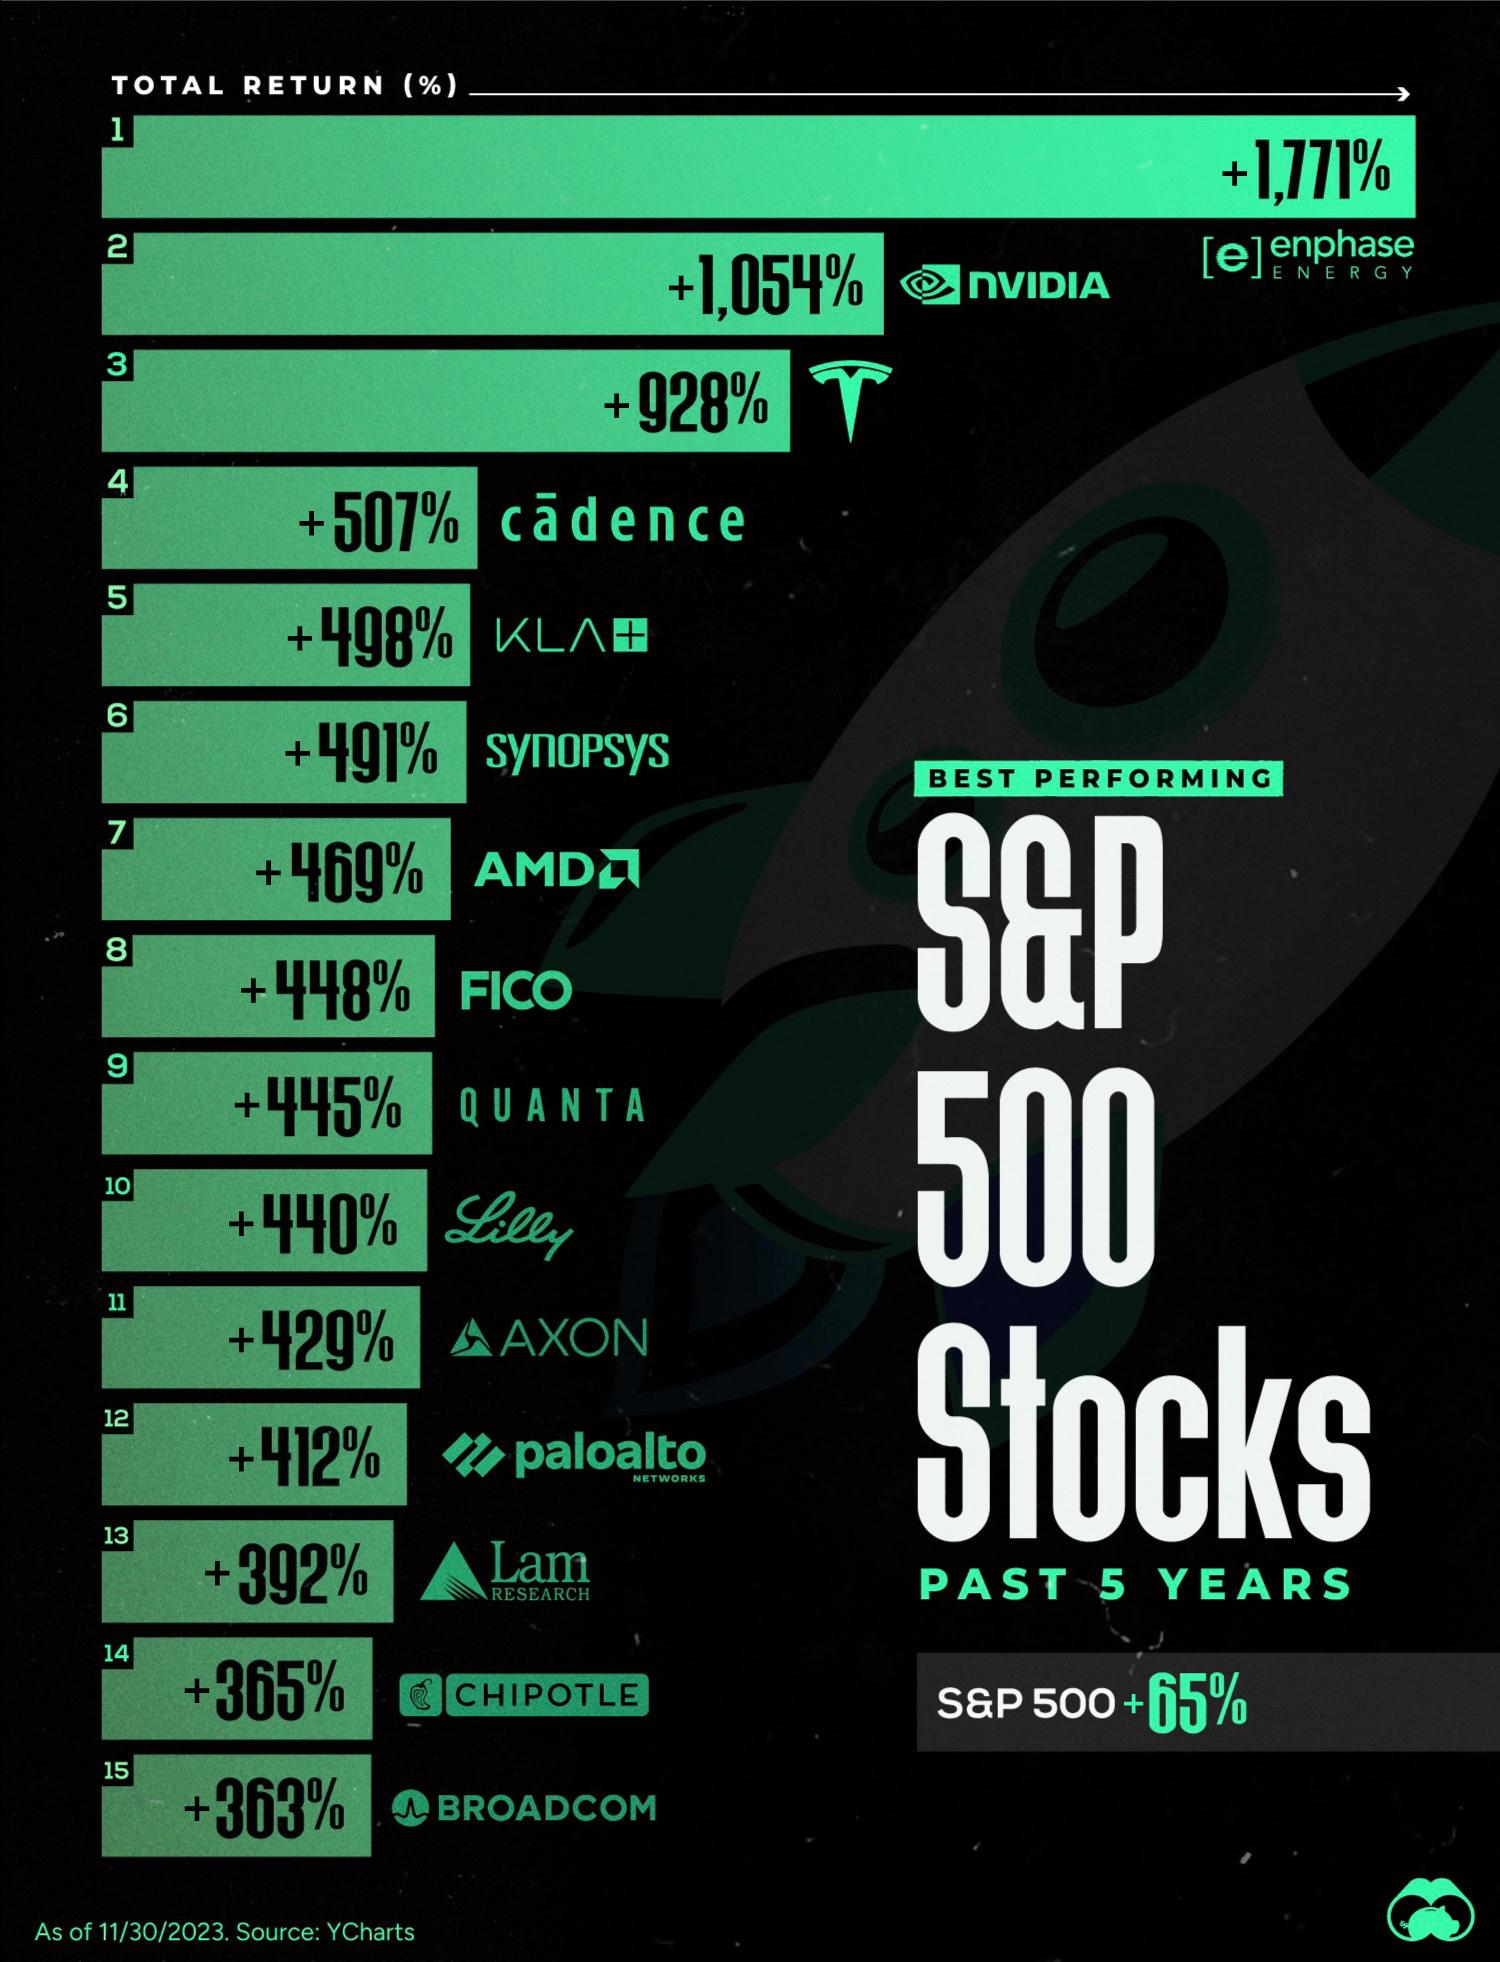 The Biggest Winners on the S&P 500 (Past 5 Years) 🚀